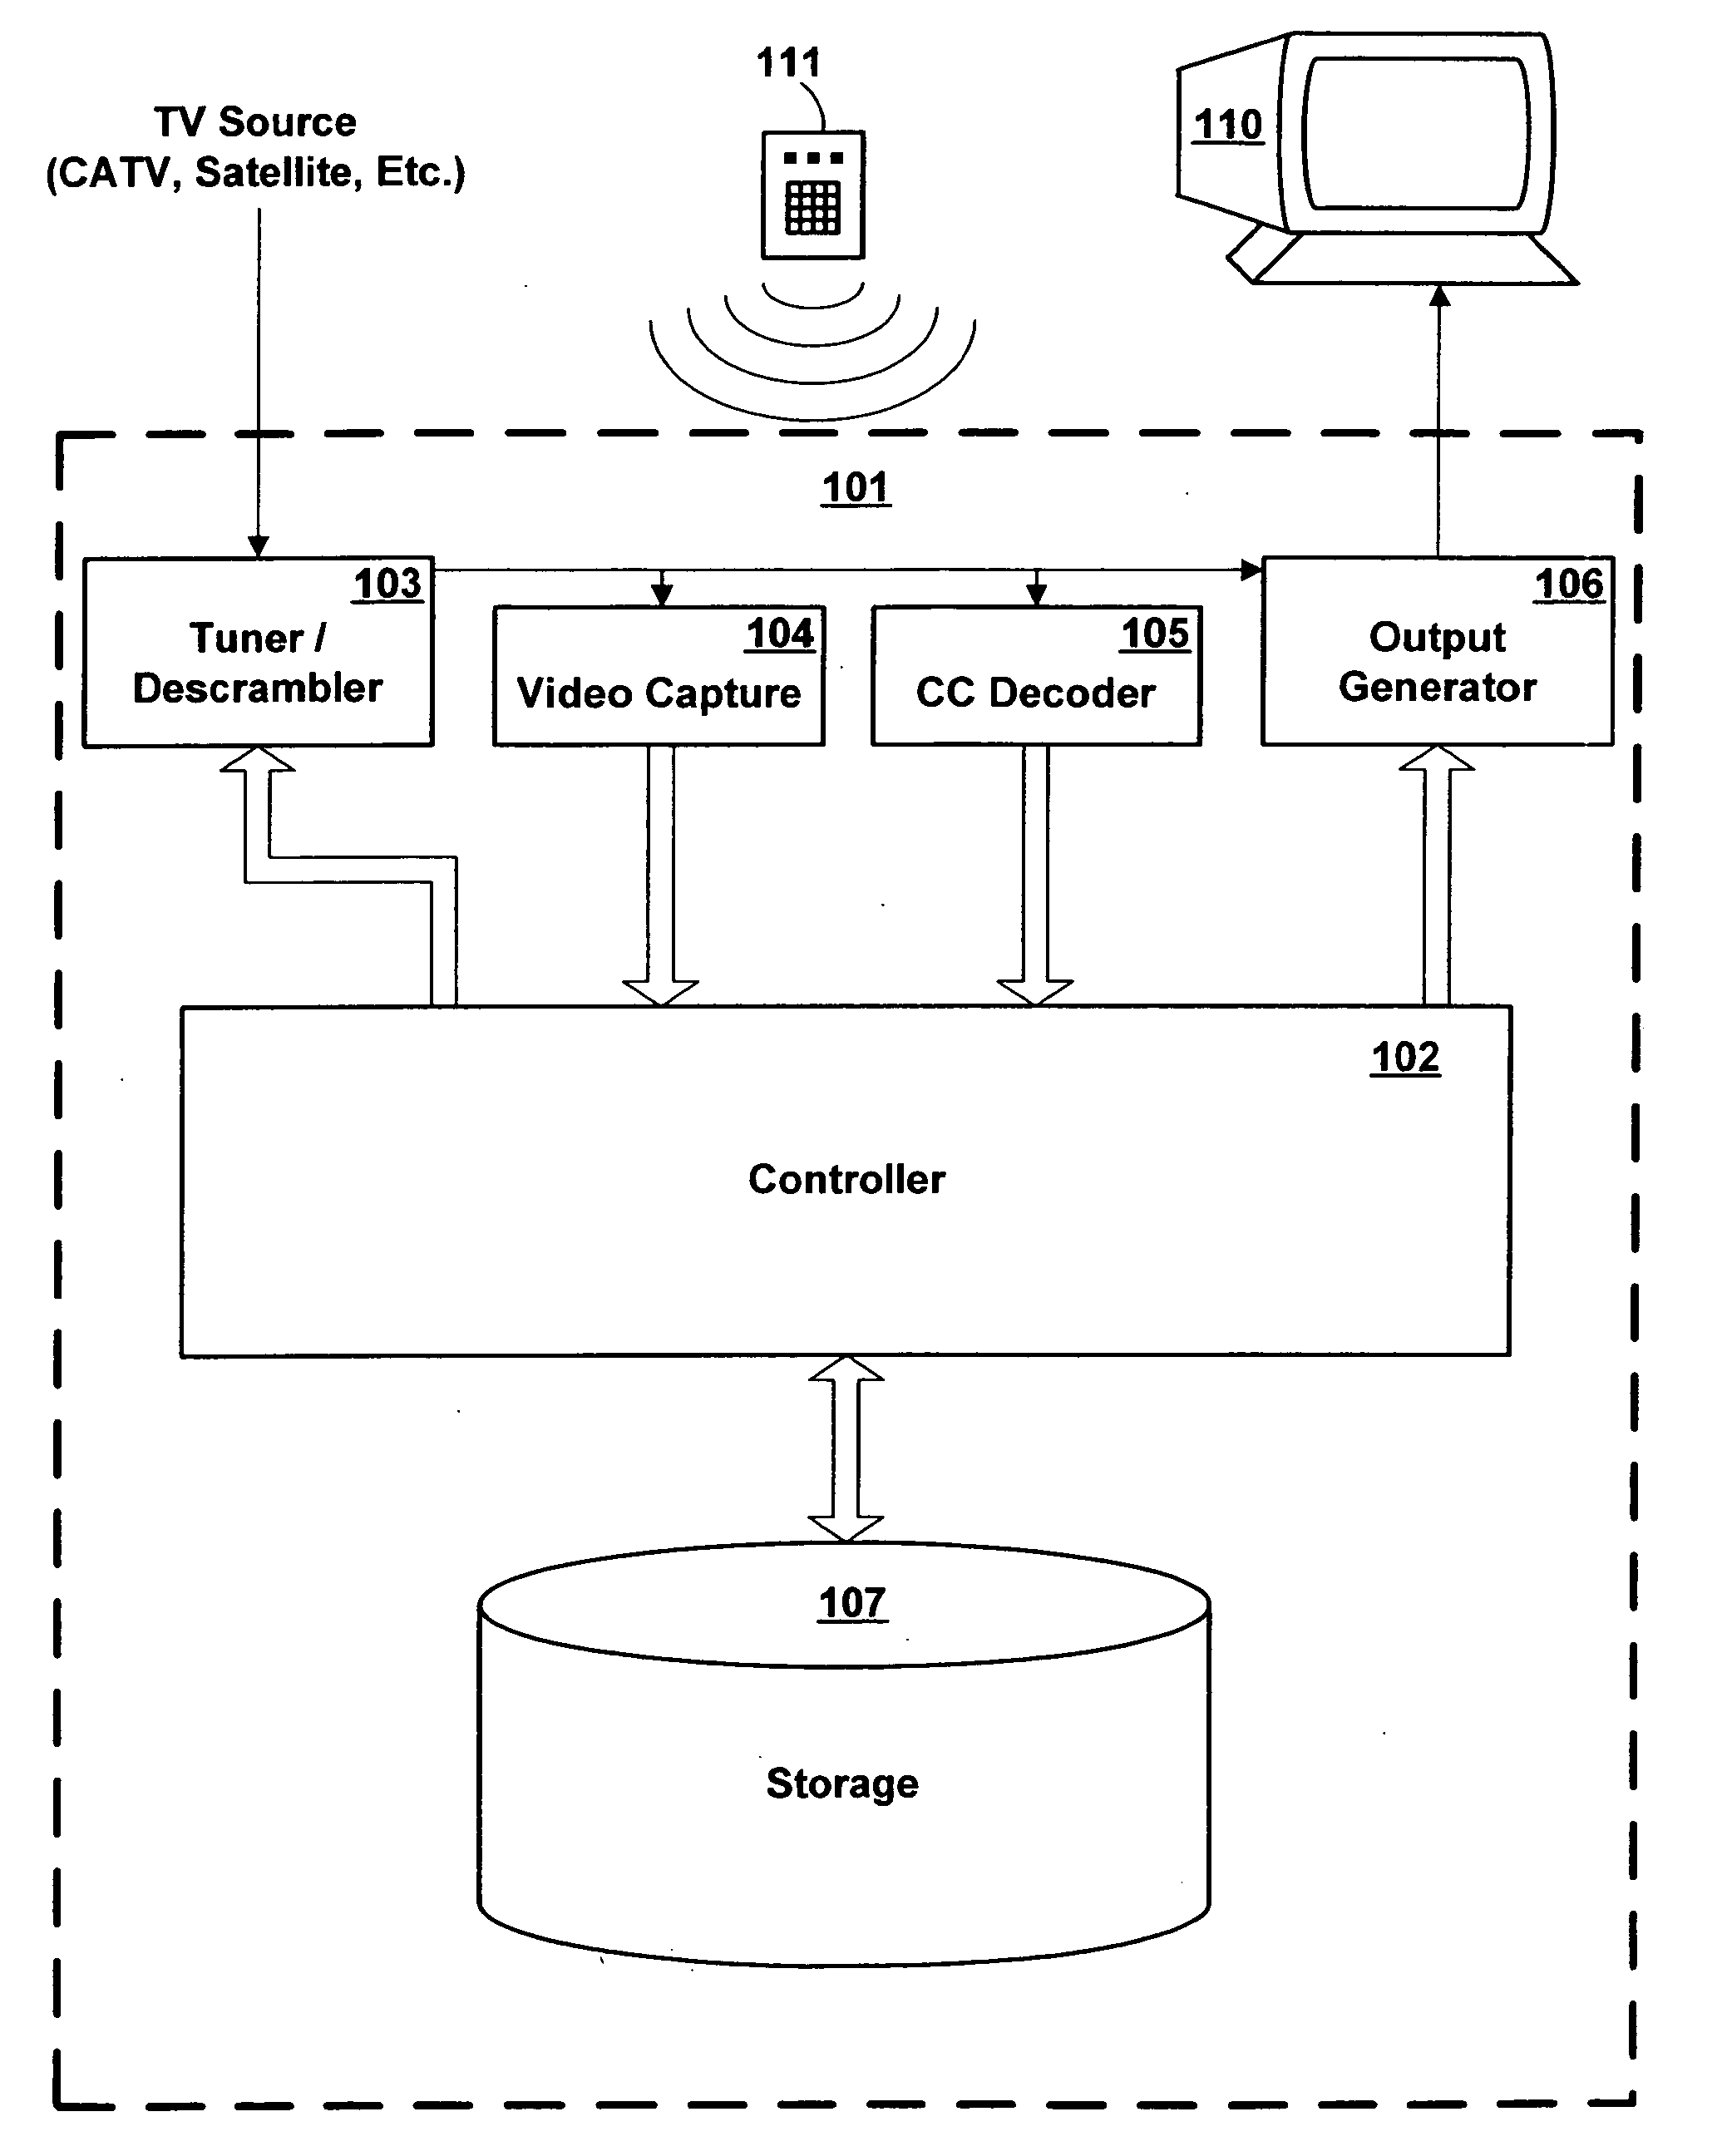 Method and apparatus for using closed captioning data to identify television programming content for recording